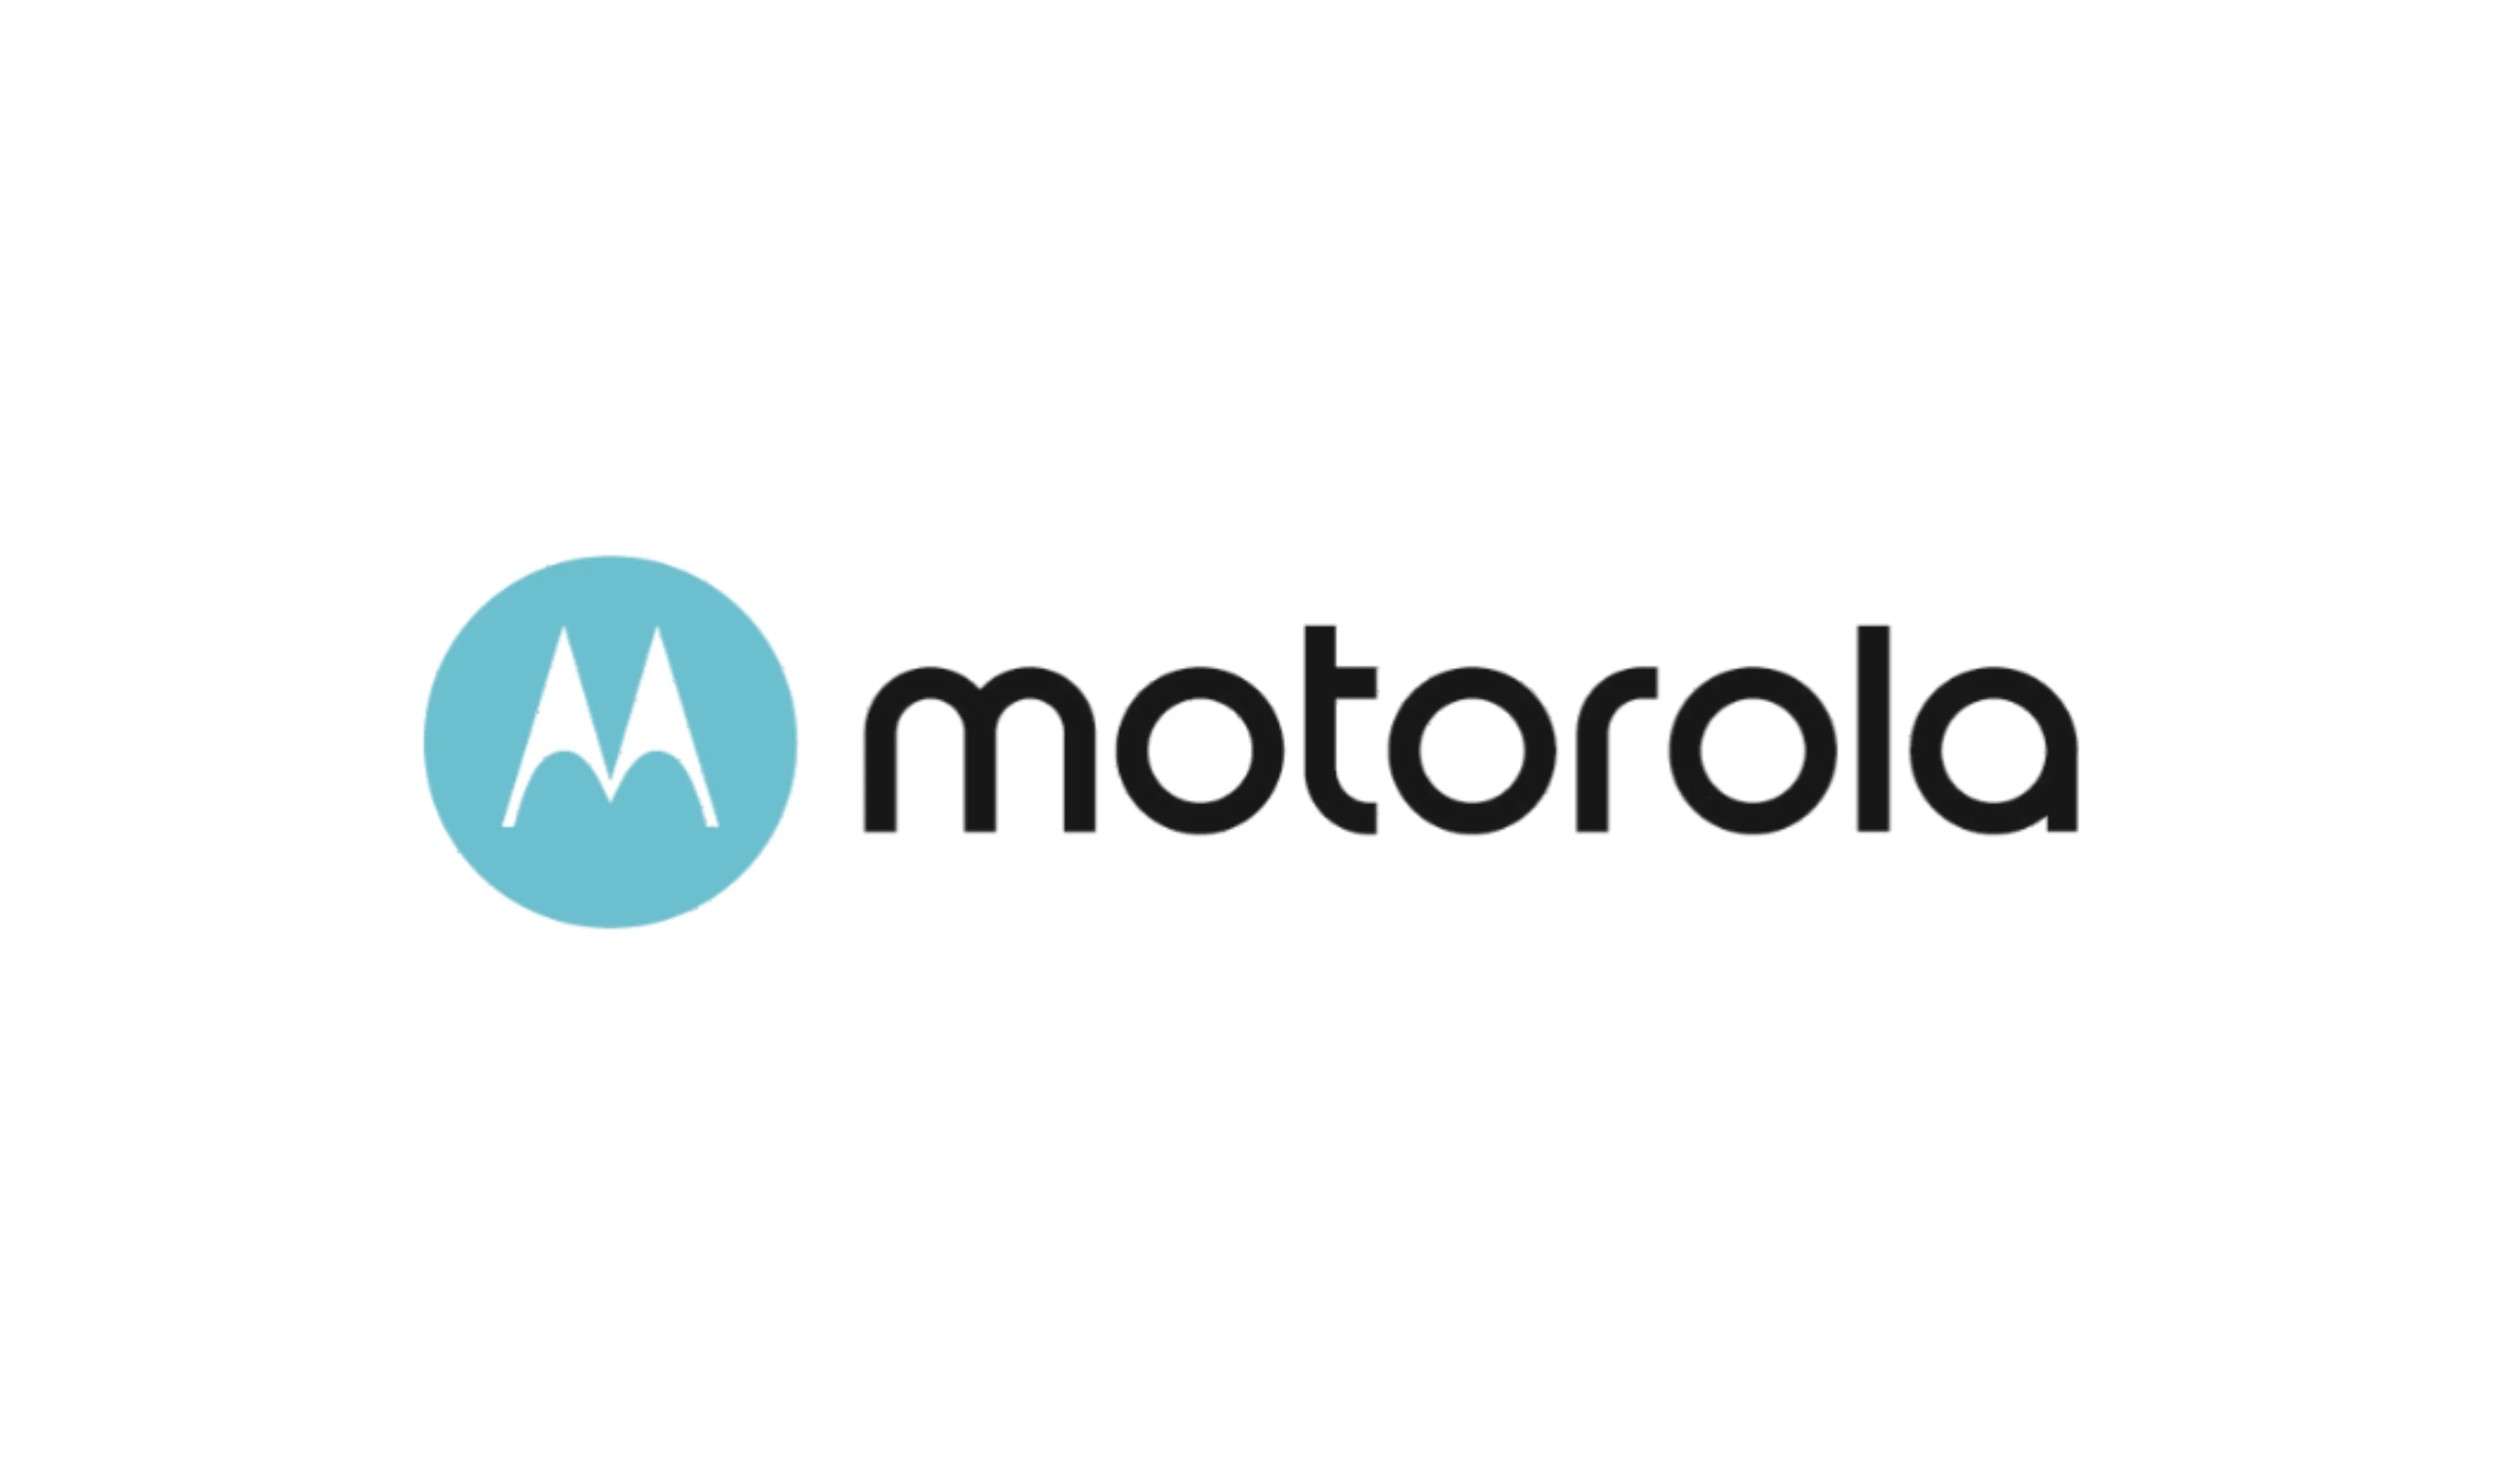 Motorola will open a tablet all the arrangement in which by a effectively-known Indian retail market tournament